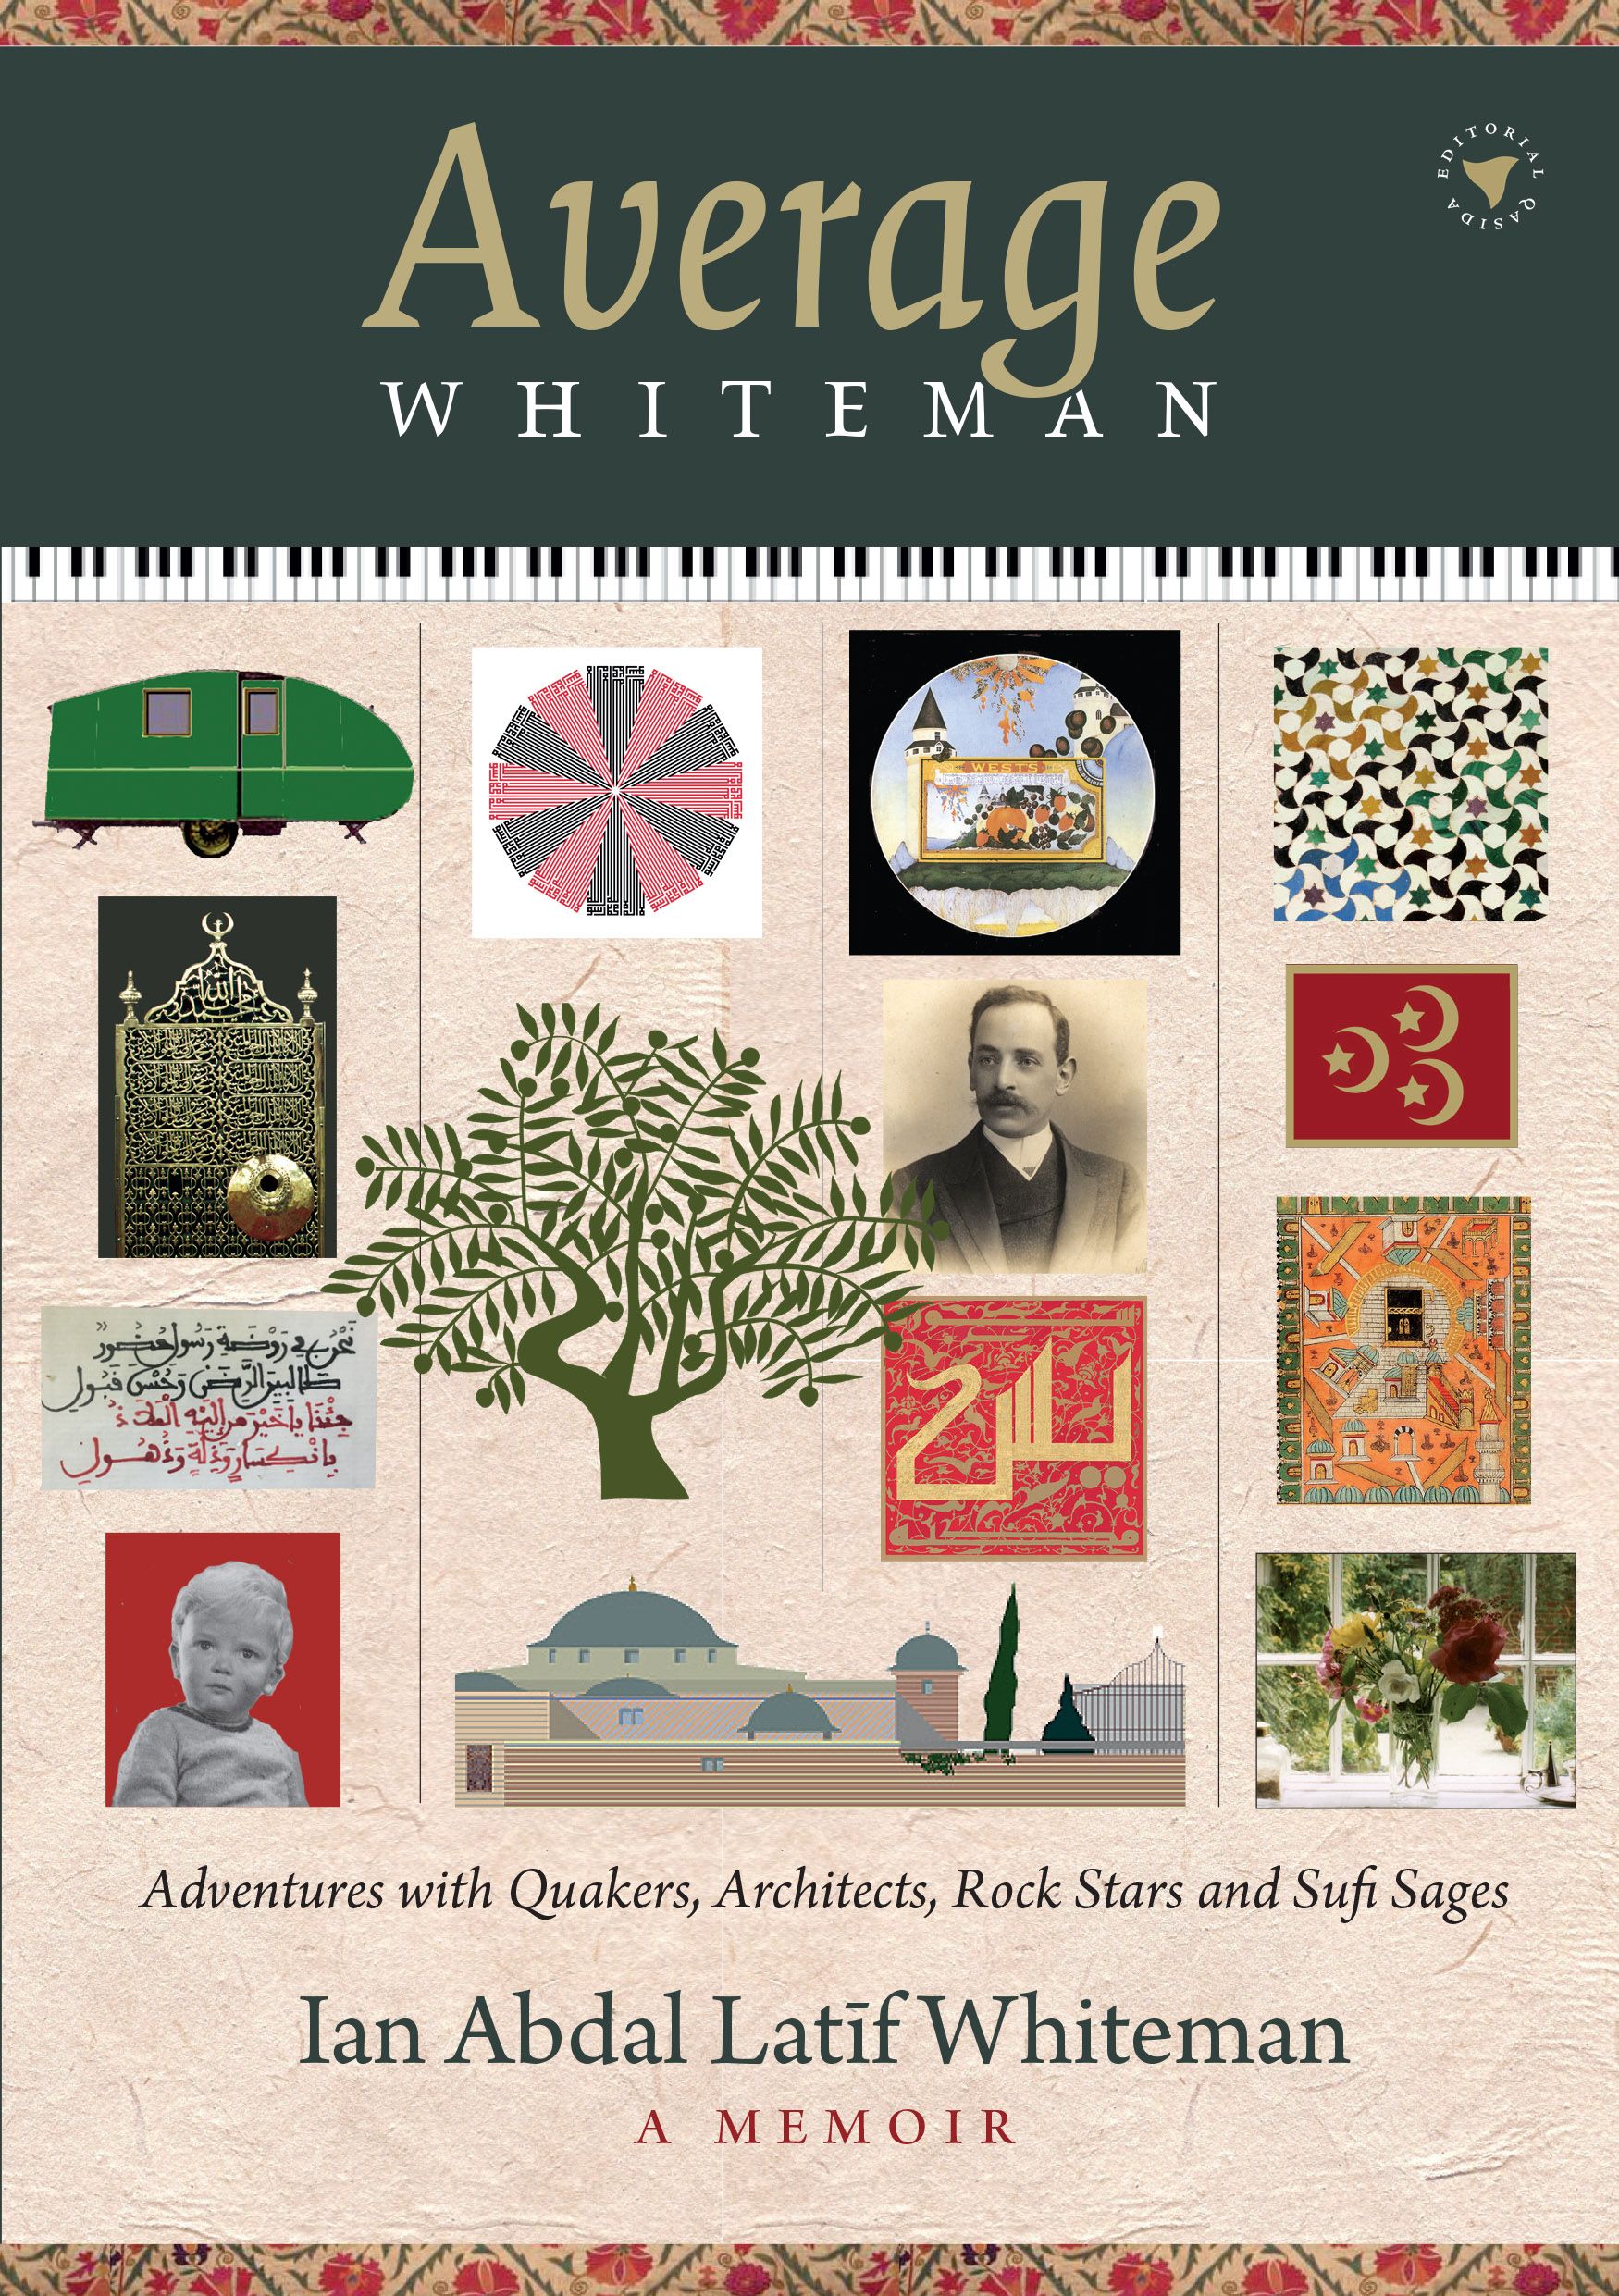 Average Whiteman - A Memoir: Adventures with Quakers, Architects, Rock Stars and Sufi Sages